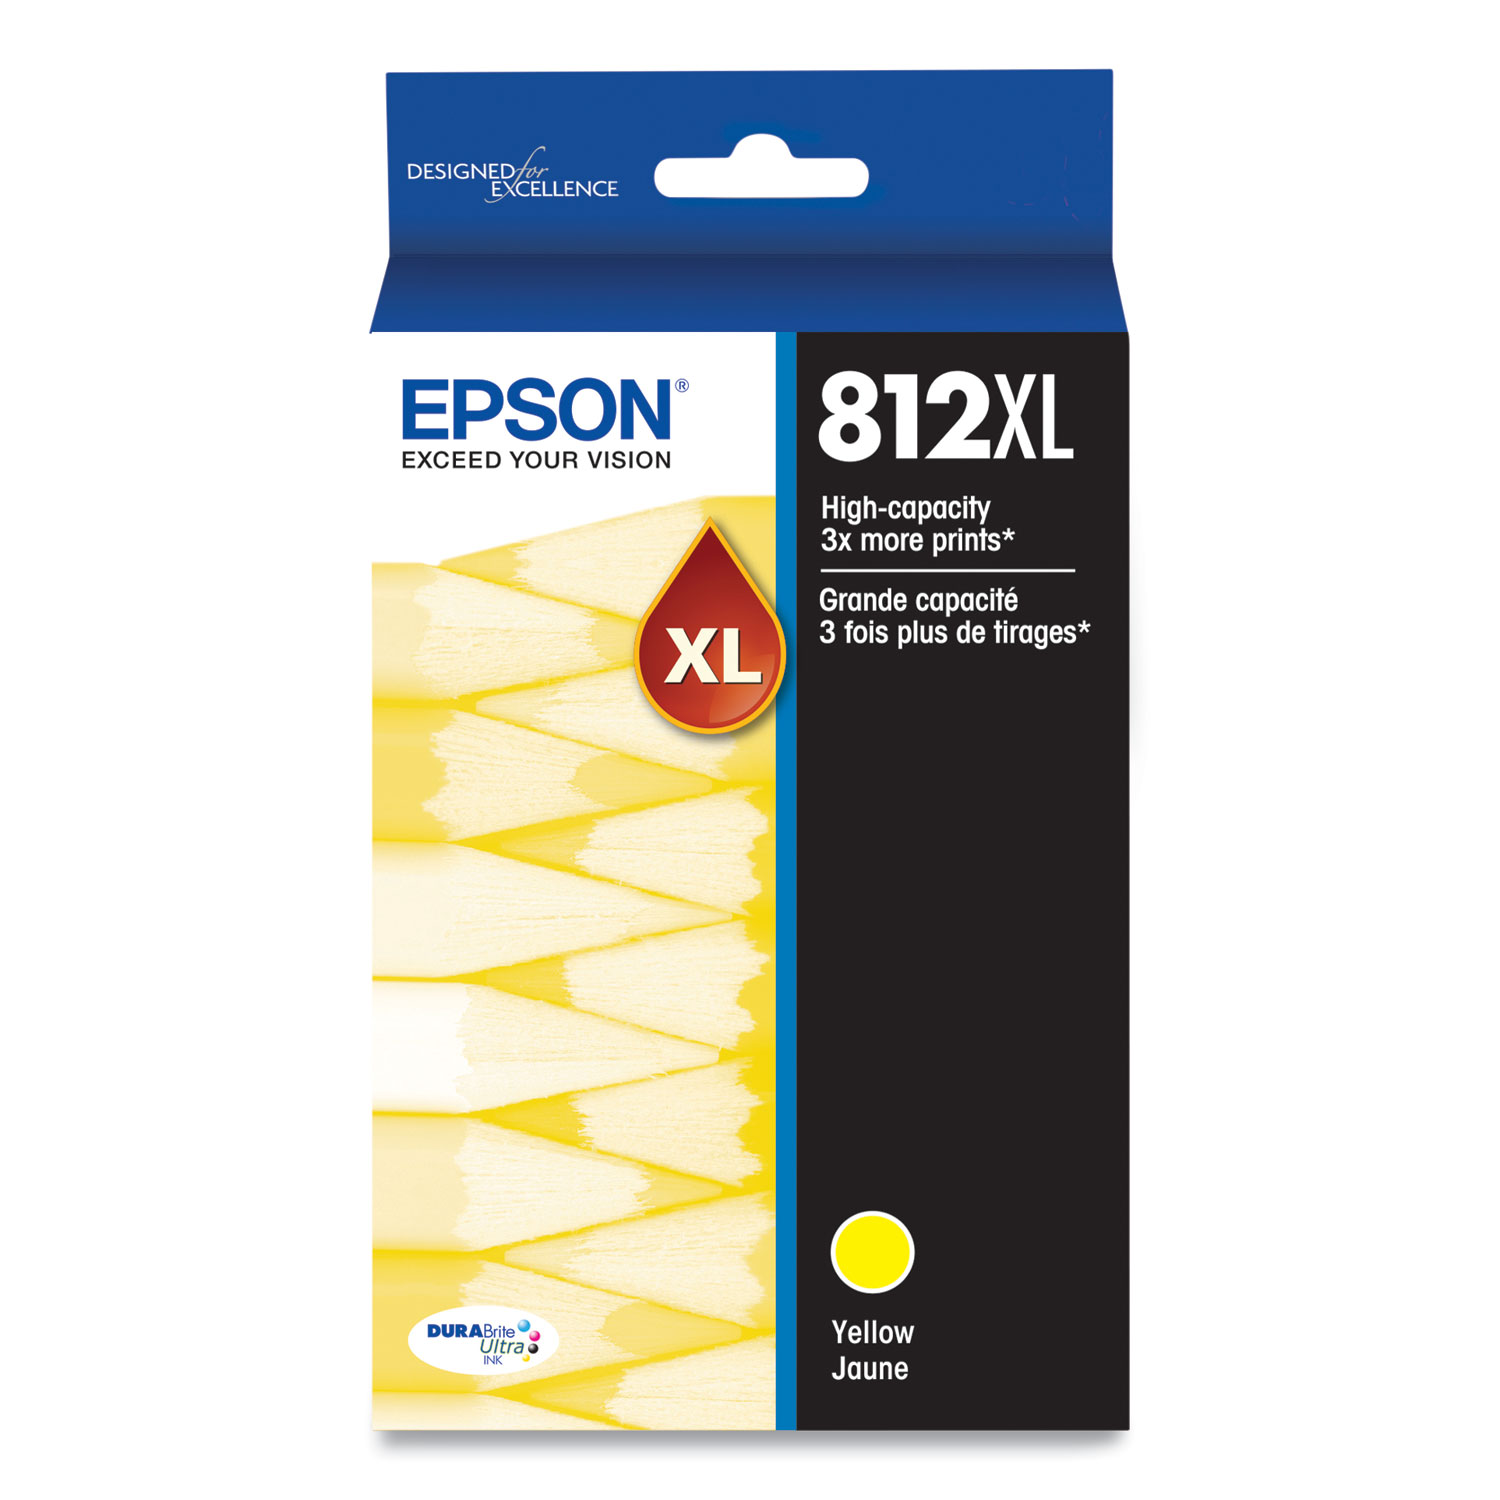 Epson® T812XL420S (T812XL) DURABrite Ultra High-Yield Ink, 1,100 Page-Yield, Yellow